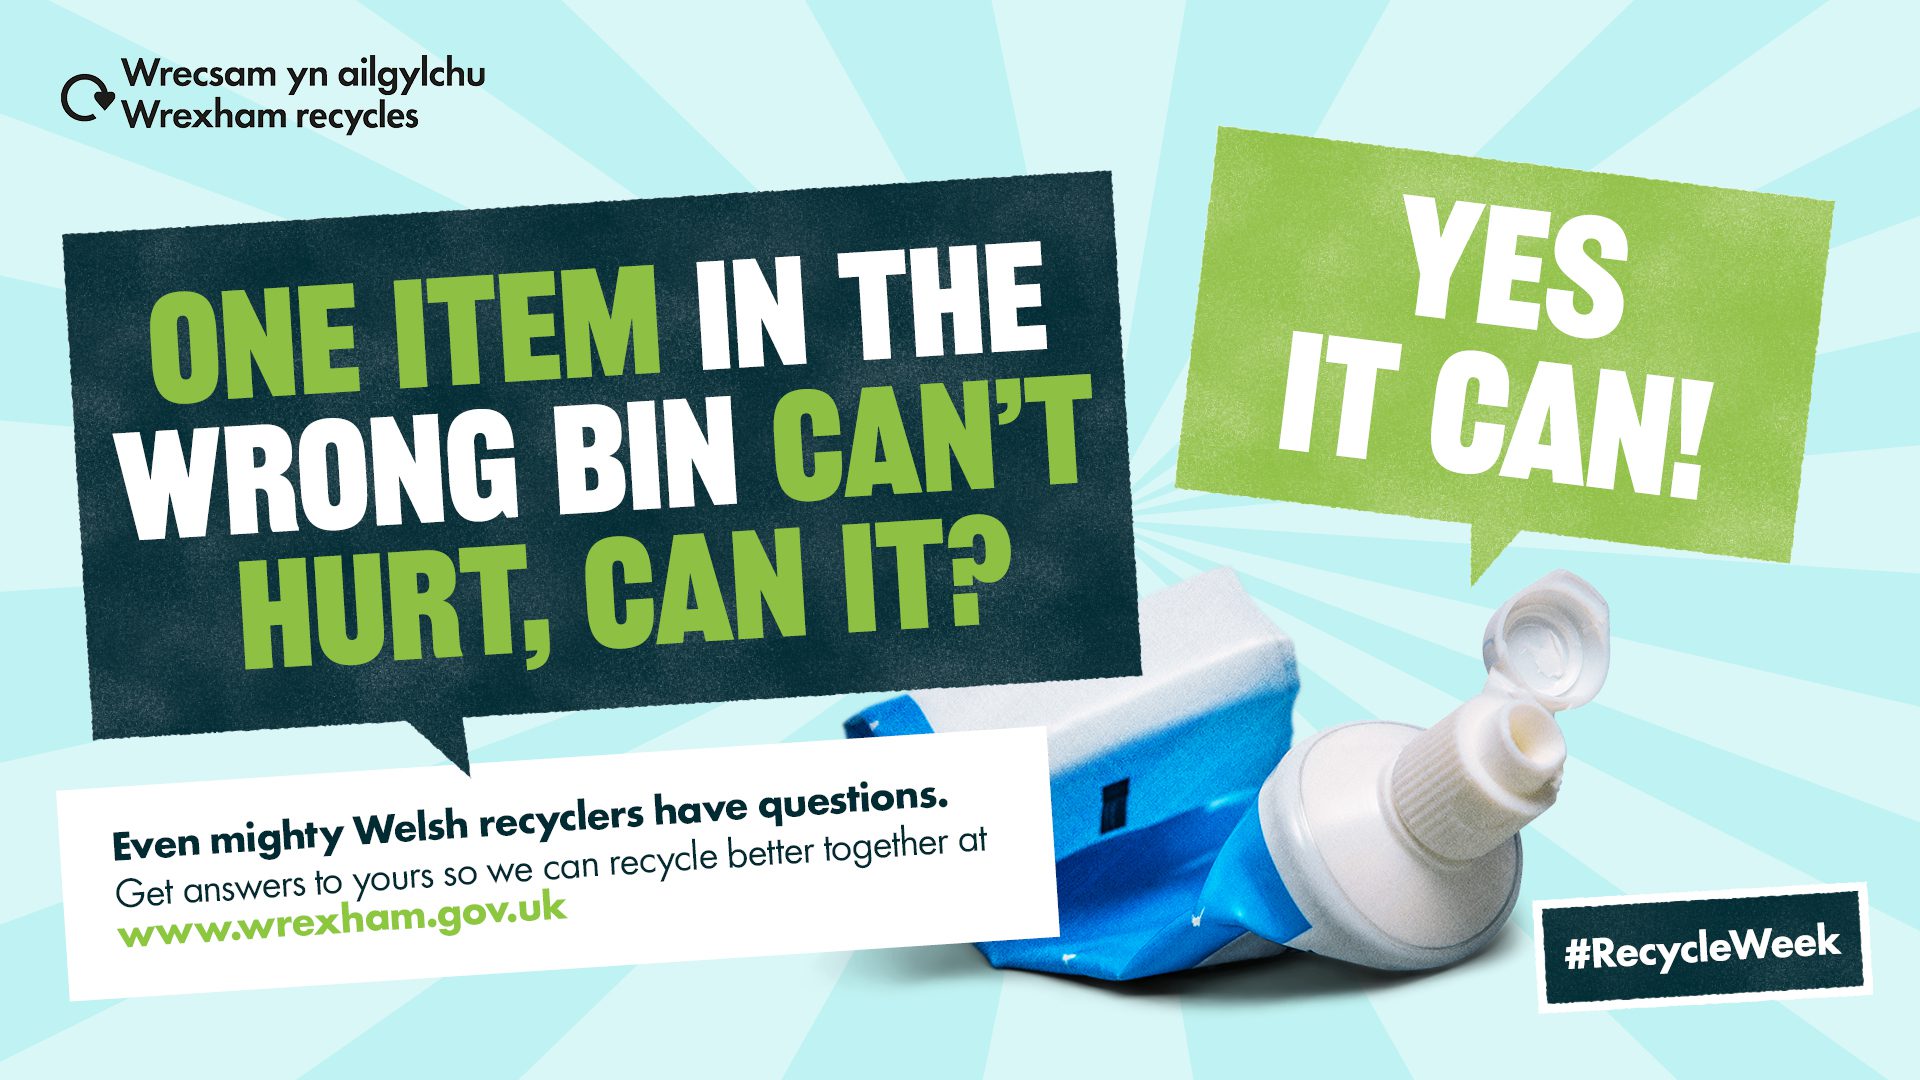 Recycle Week 2022 will answer your recycling questions